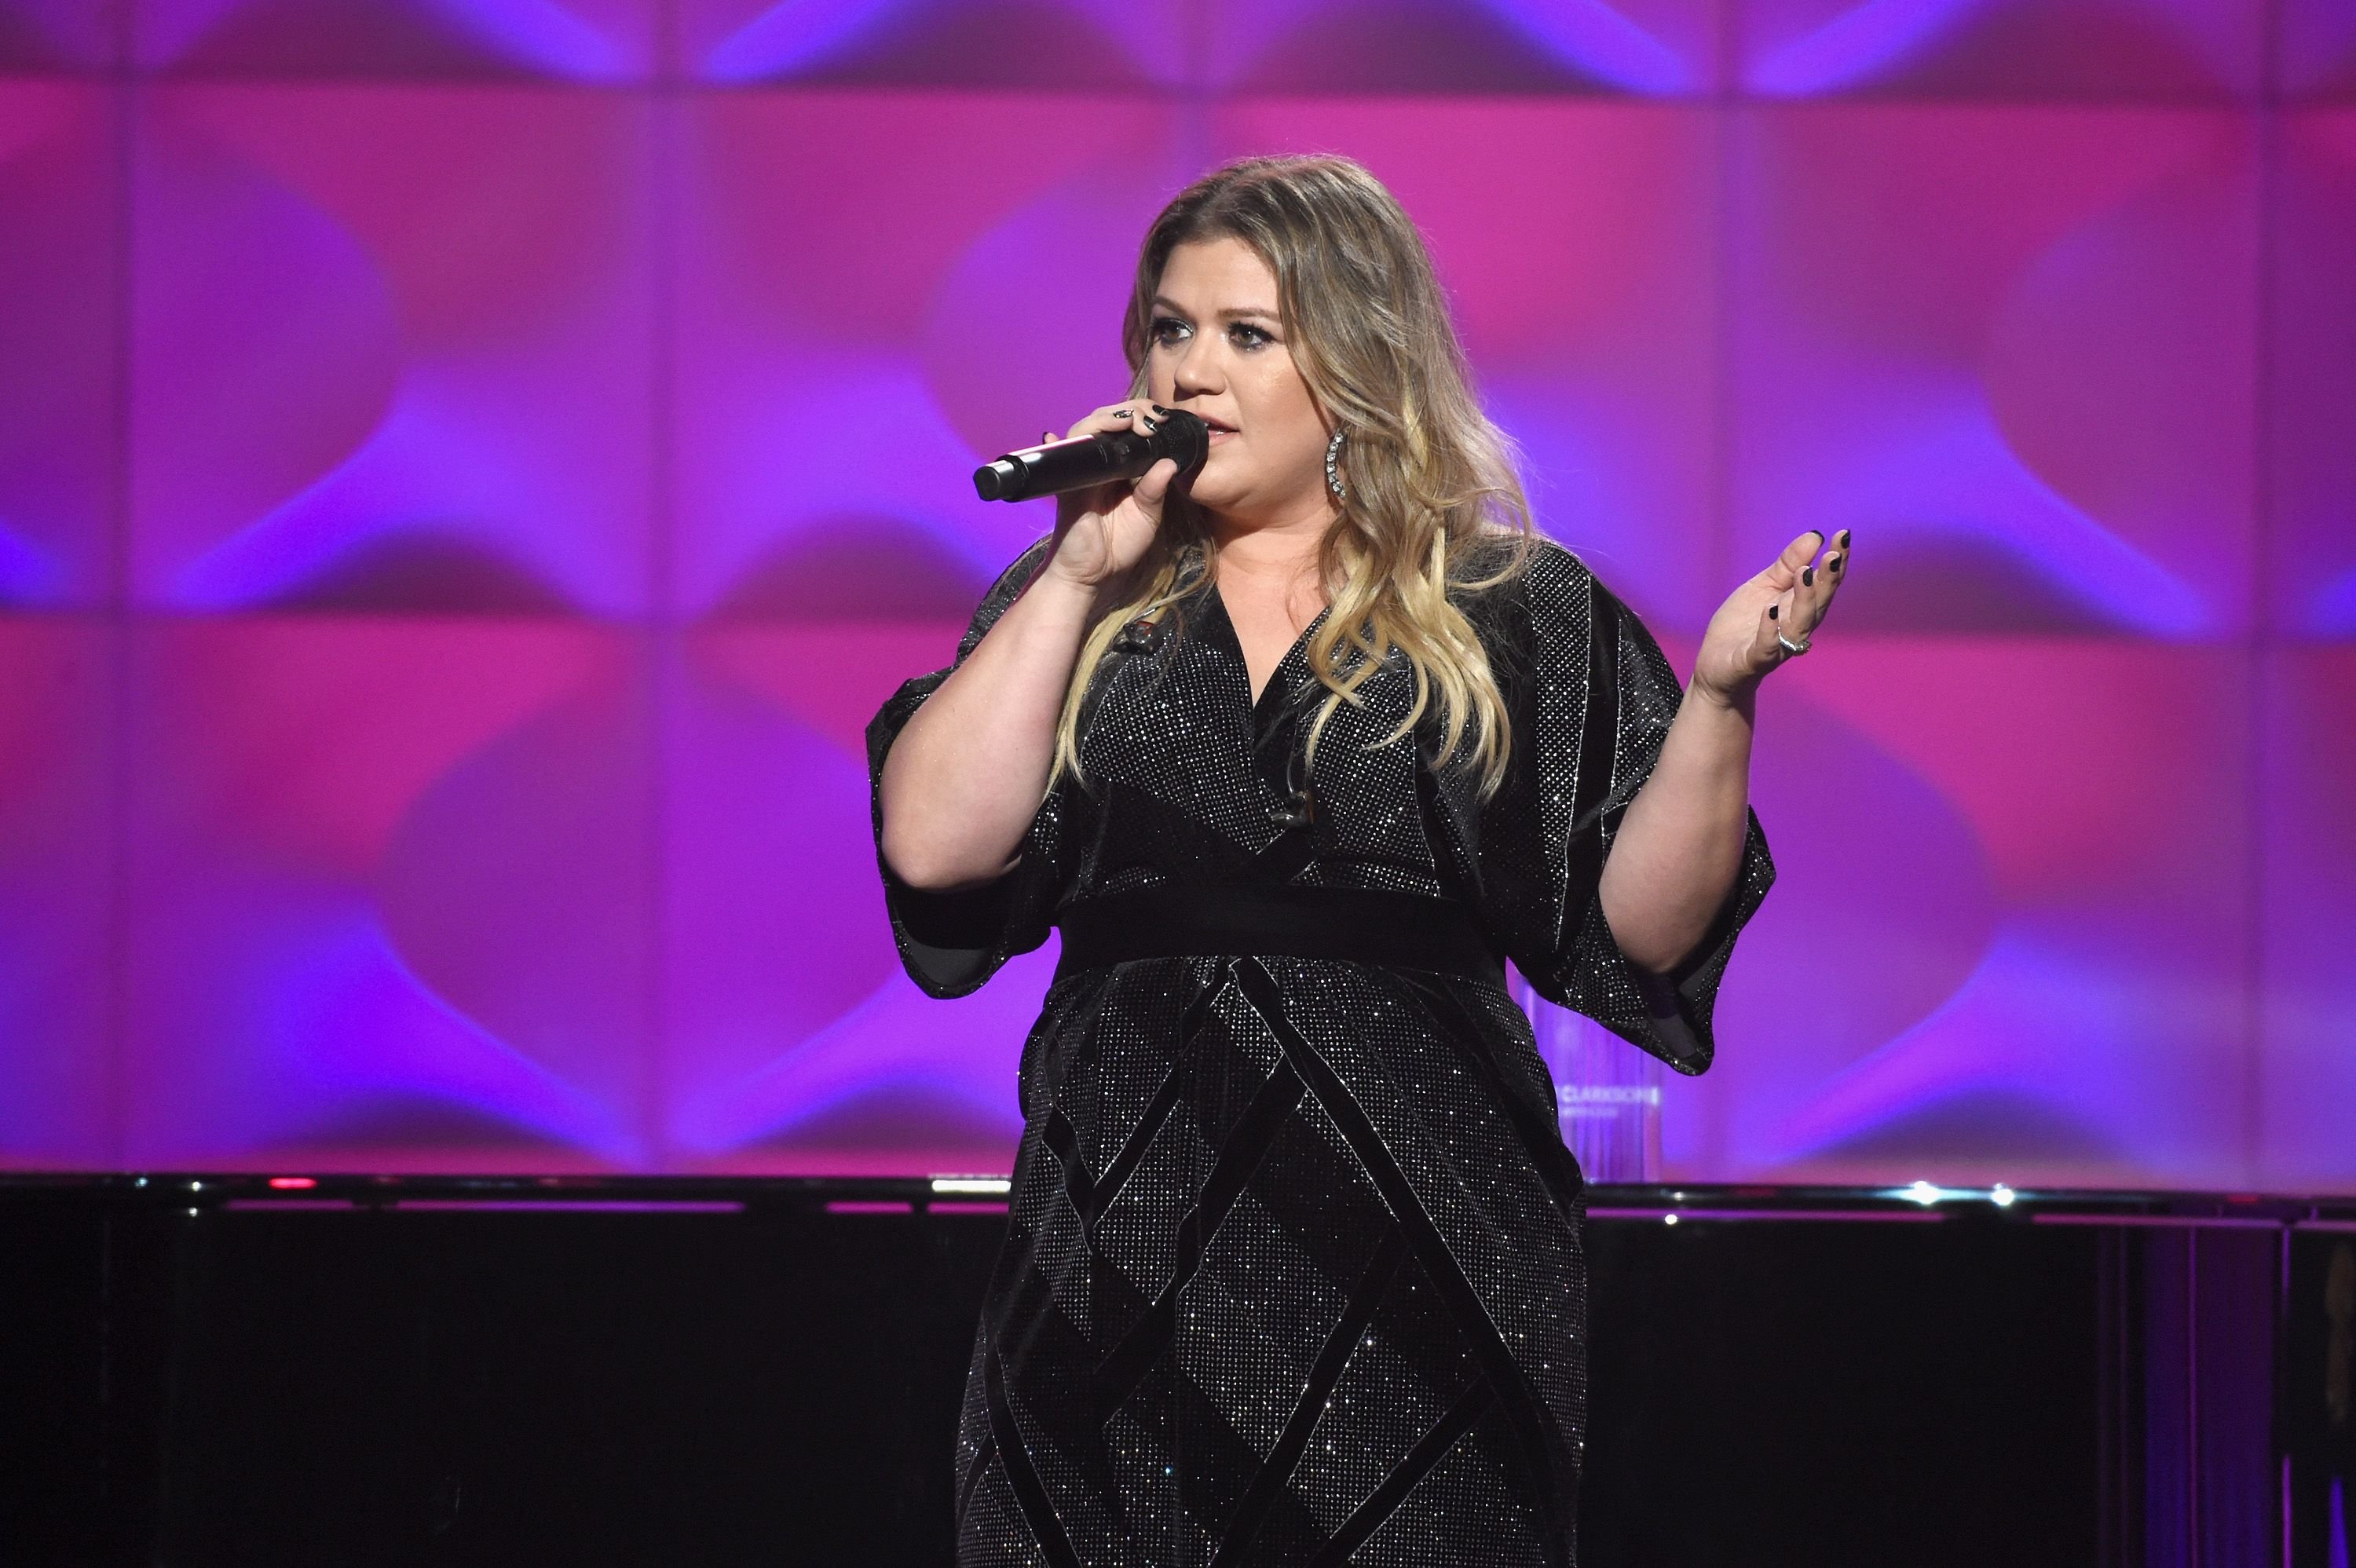   Kelly Clarkson during the Billboard Women In Music 2017 at The Ray Dolby Ballroom at Hollywood & Highland Center on November 30, 2017 in Hollywood, California. | Source: Getty Images